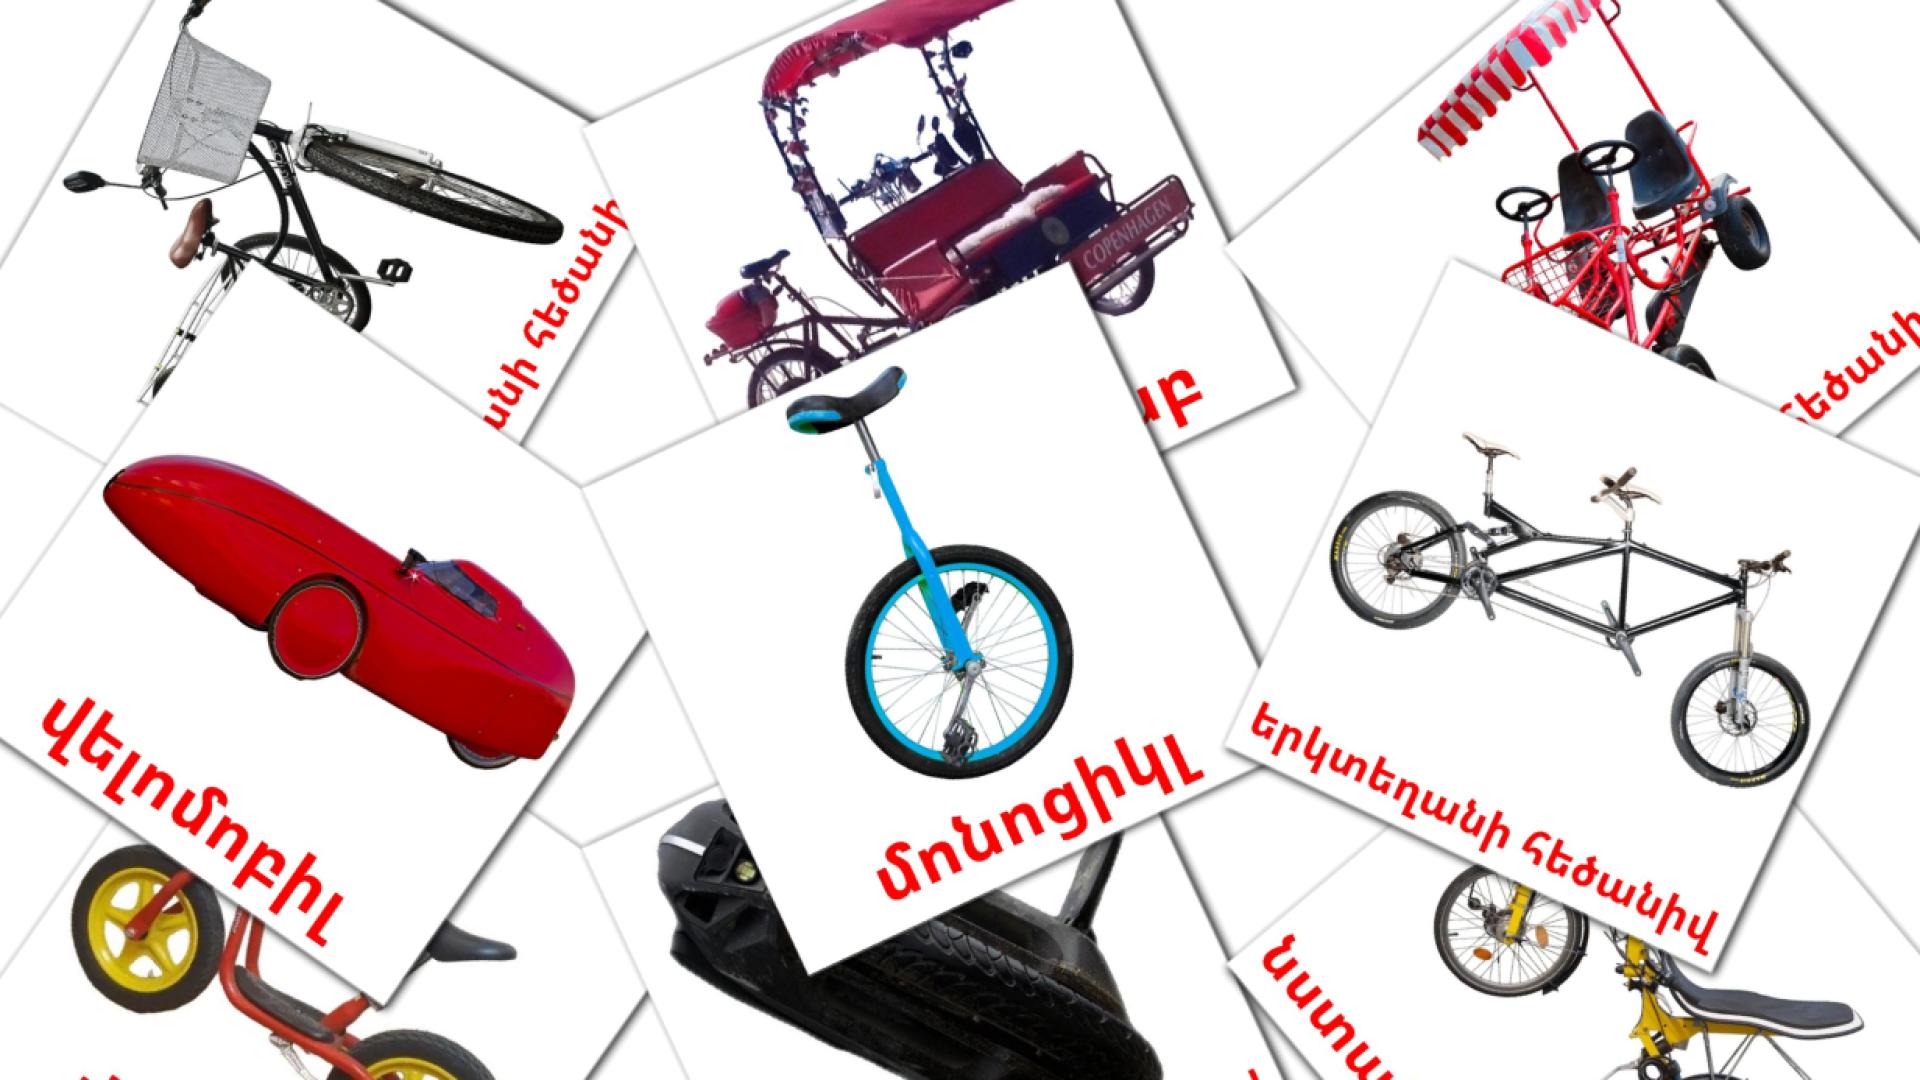 Bicycle transport flashcards